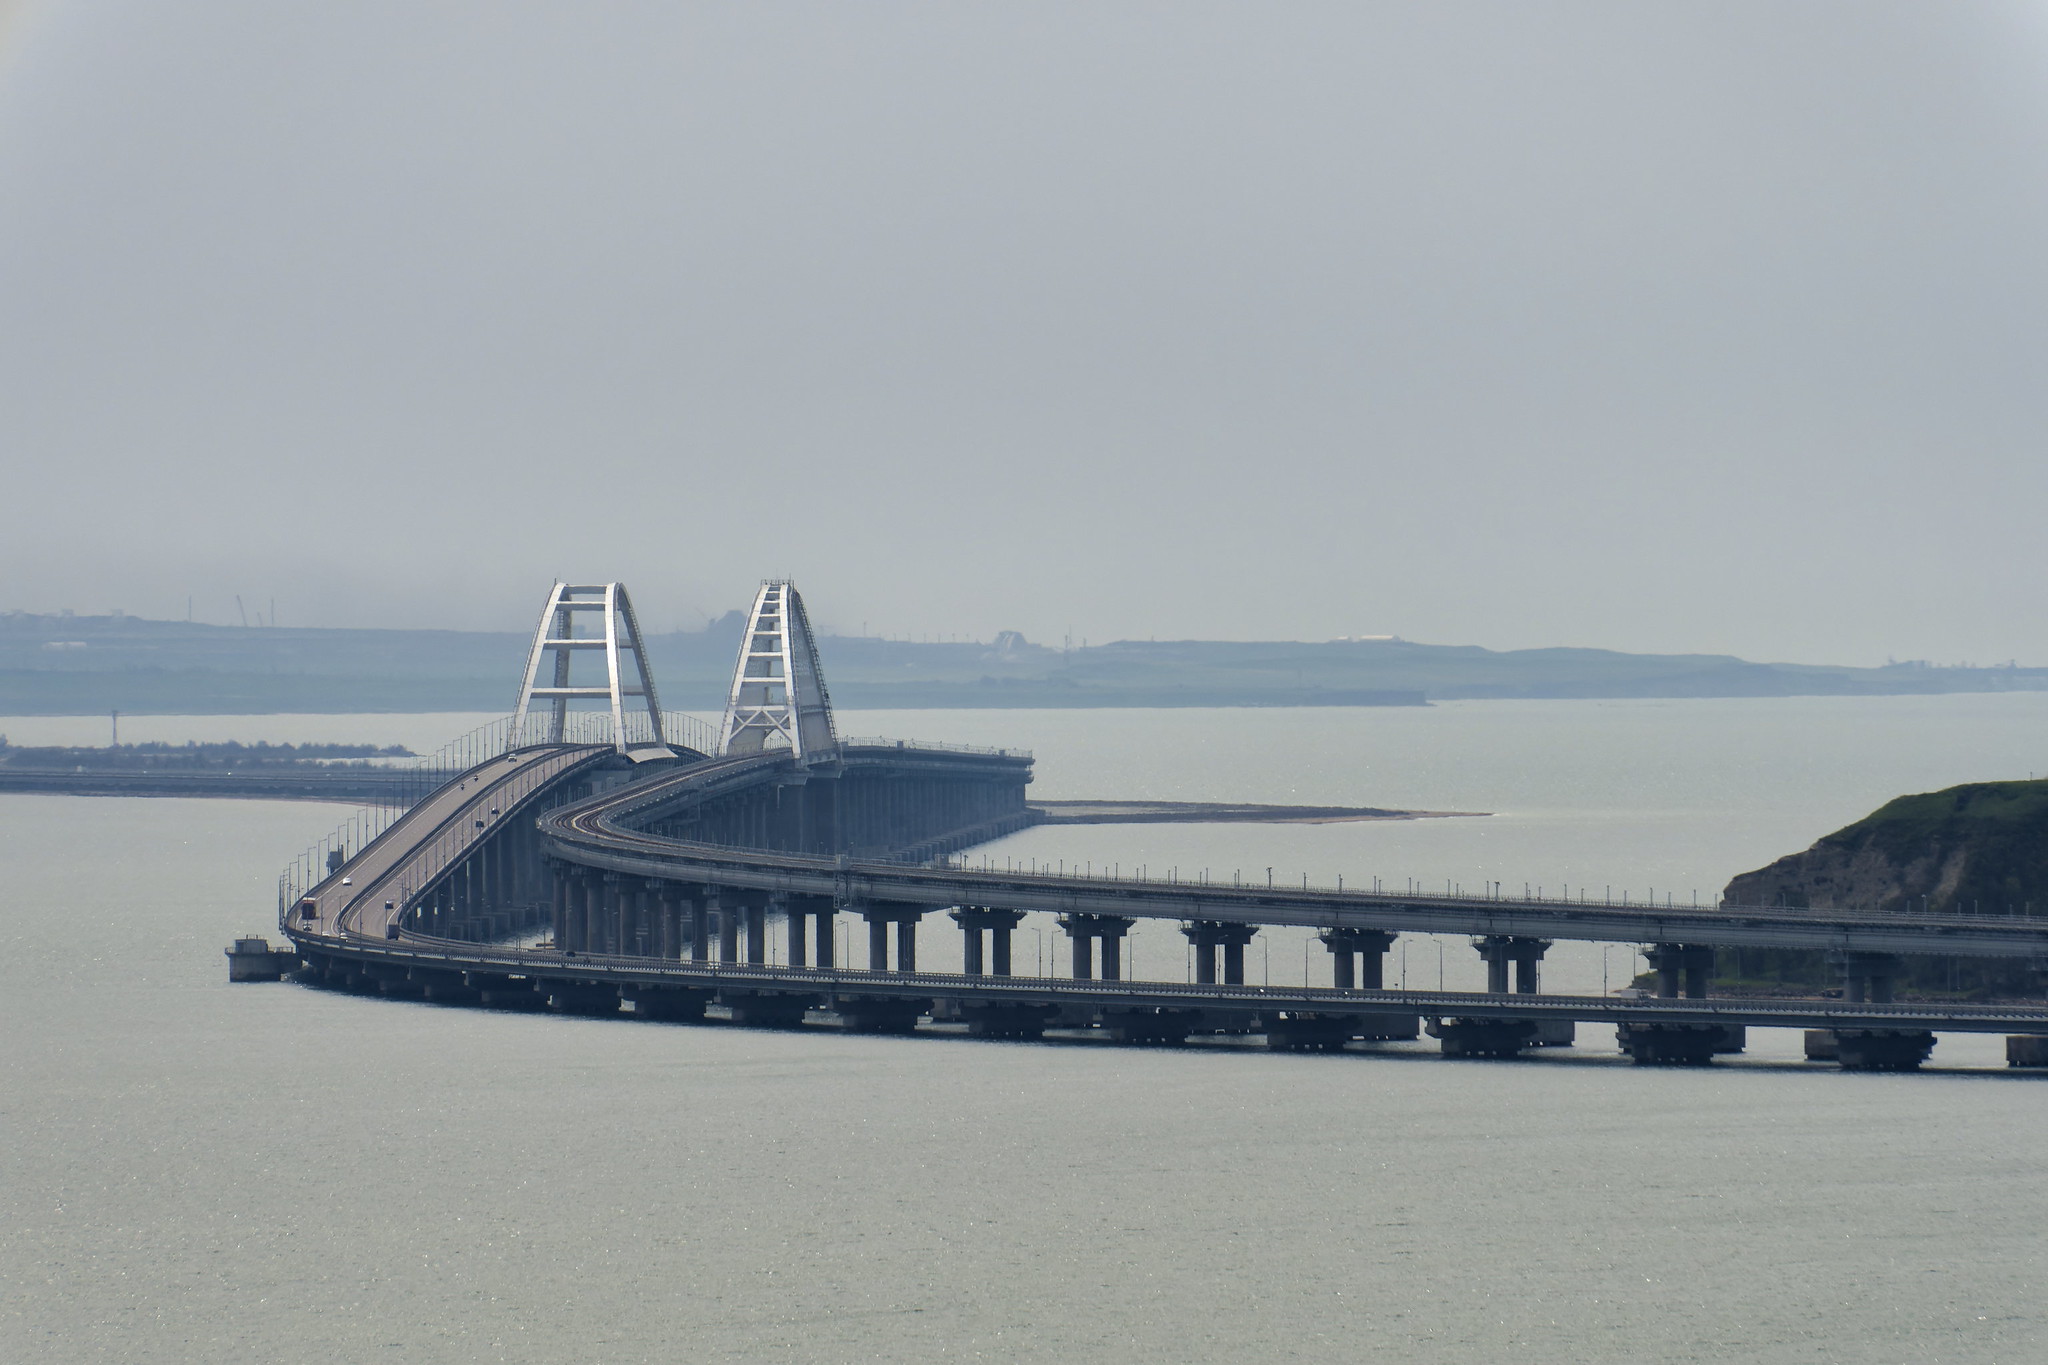 The Crimea bridge. "Kerch 110" by Alexxx1979 is licensed under CC BY-SA 2.0. To view a copy of this license, visit https://creativecommons.org/licenses/by-sa/2.0/?ref=openverse.